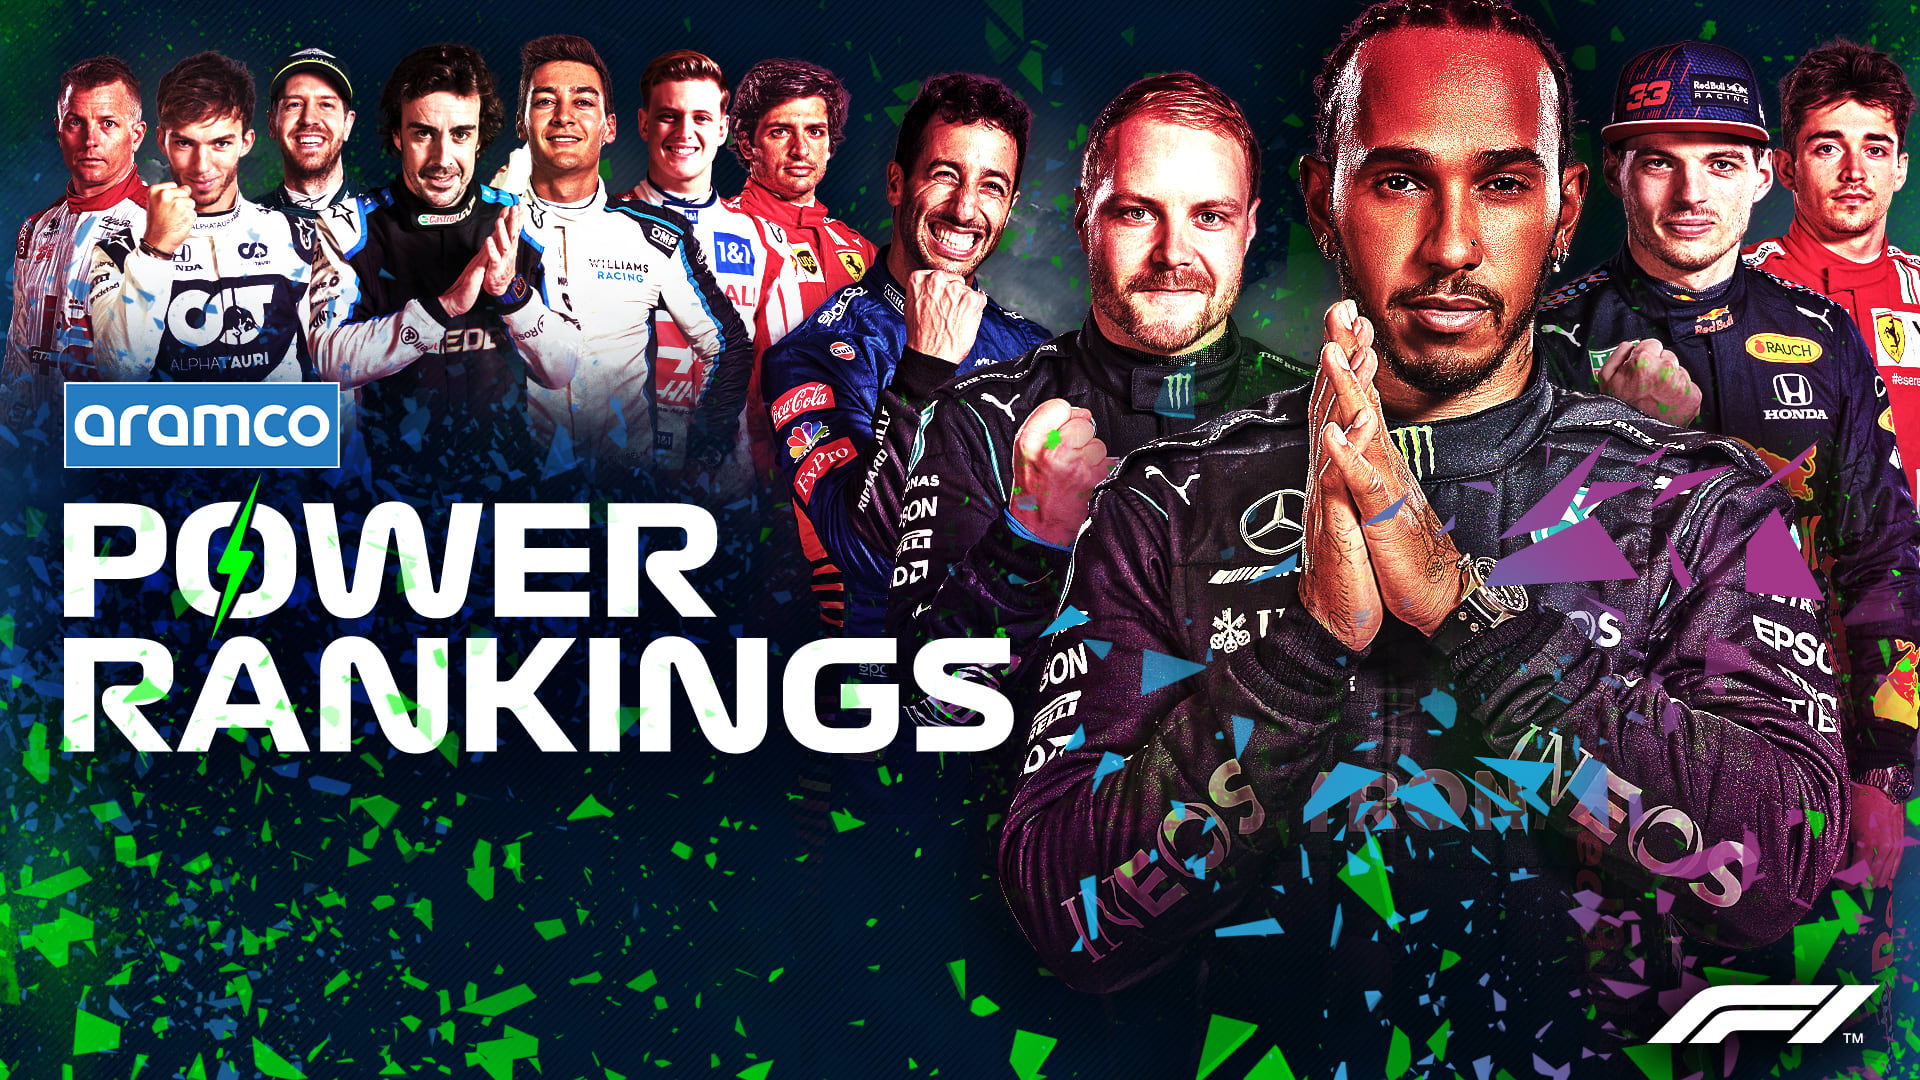 F1 POWER RANKINGS after the 2021 Bahrain Grand Prix Who started their